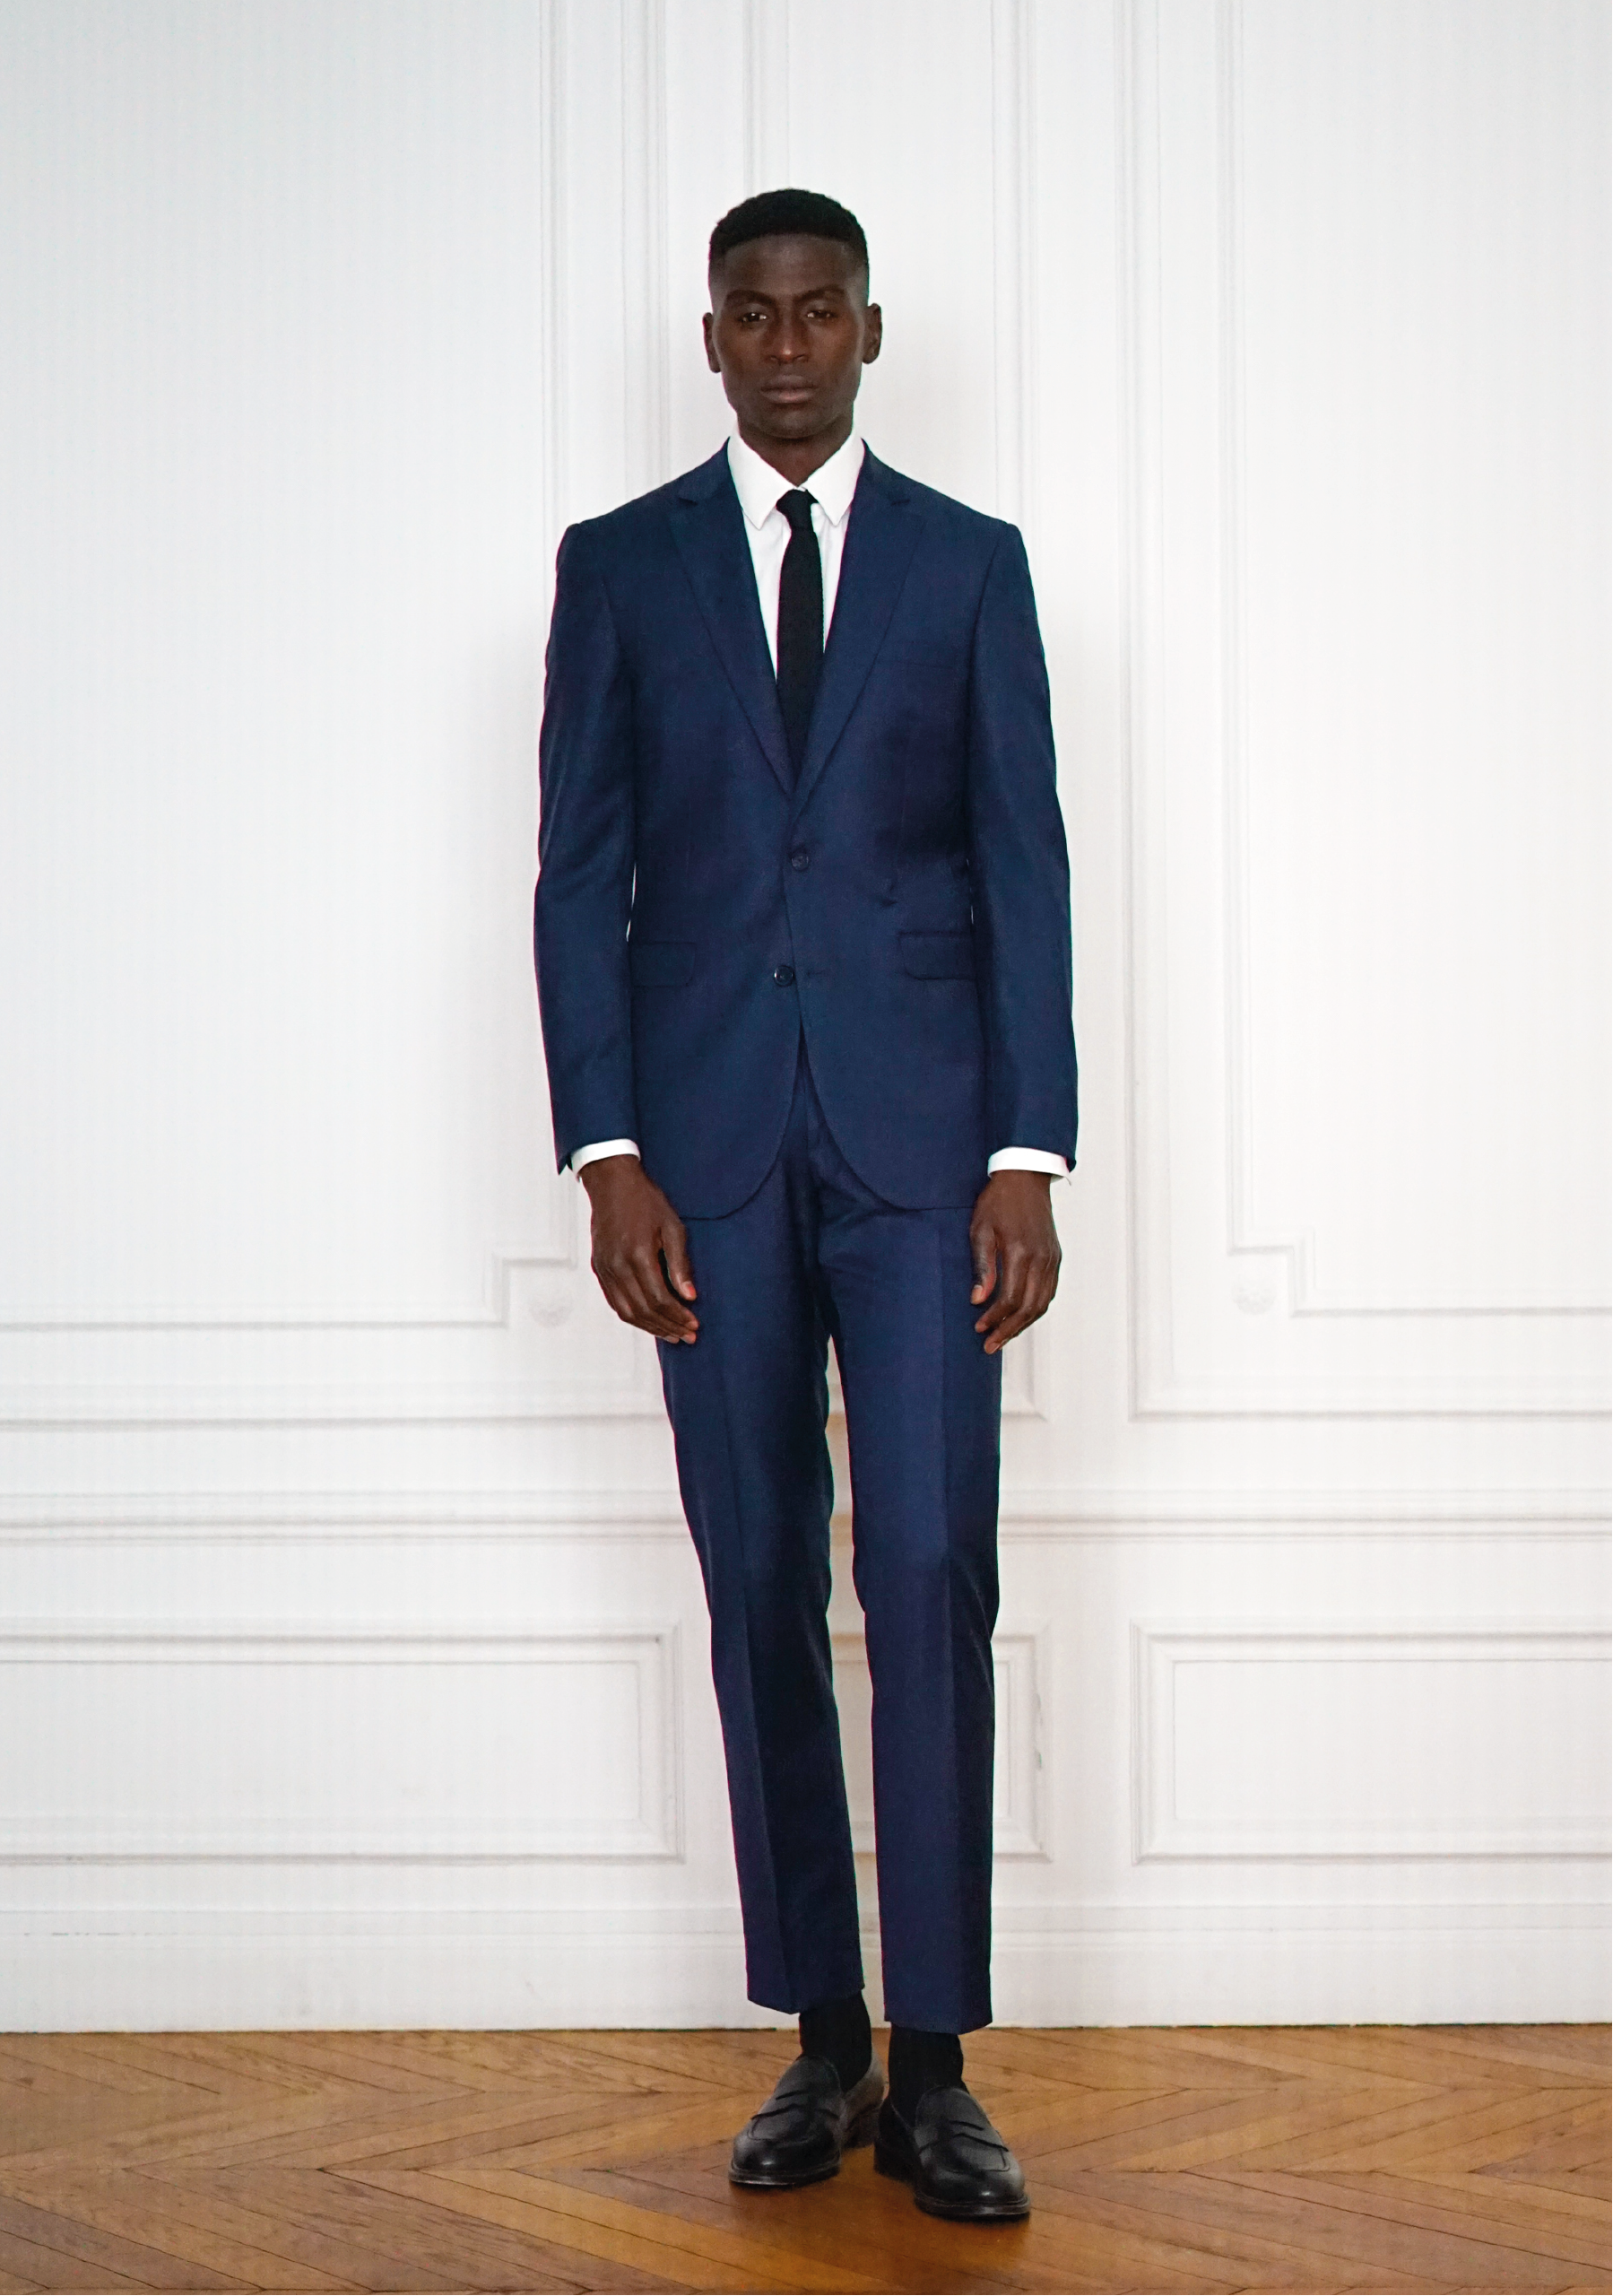 WHAT SHOES TO WEAR WITH A BLUE SUIT? 3 LOOKS TO INSPIRE YOU!